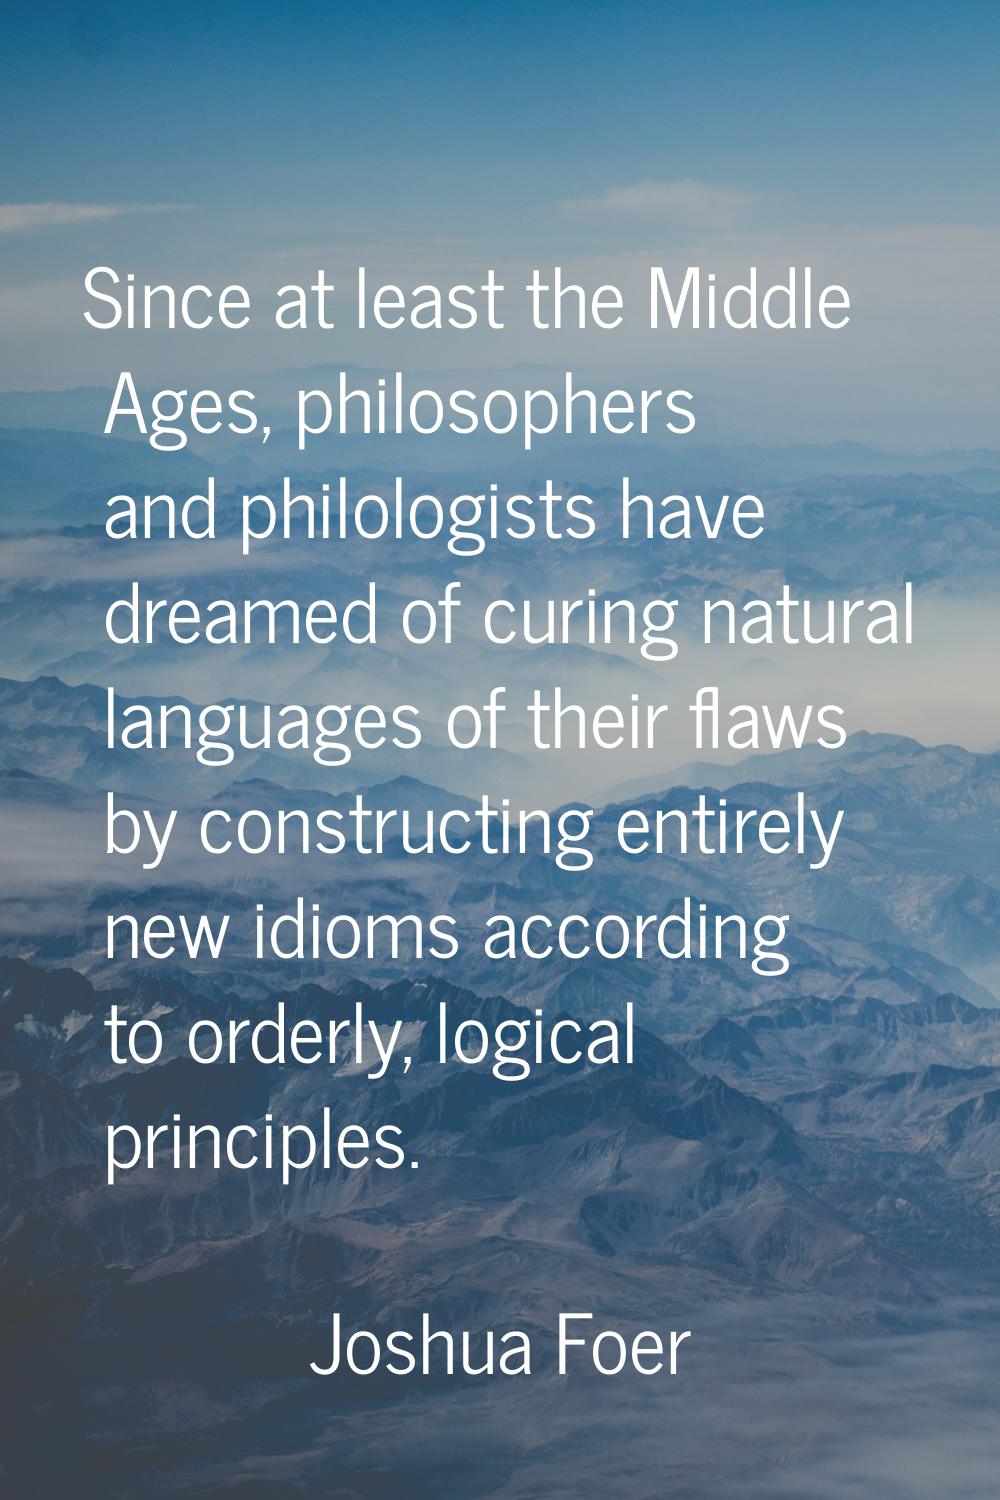 Since at least the Middle Ages, philosophers and philologists have dreamed of curing natural langua